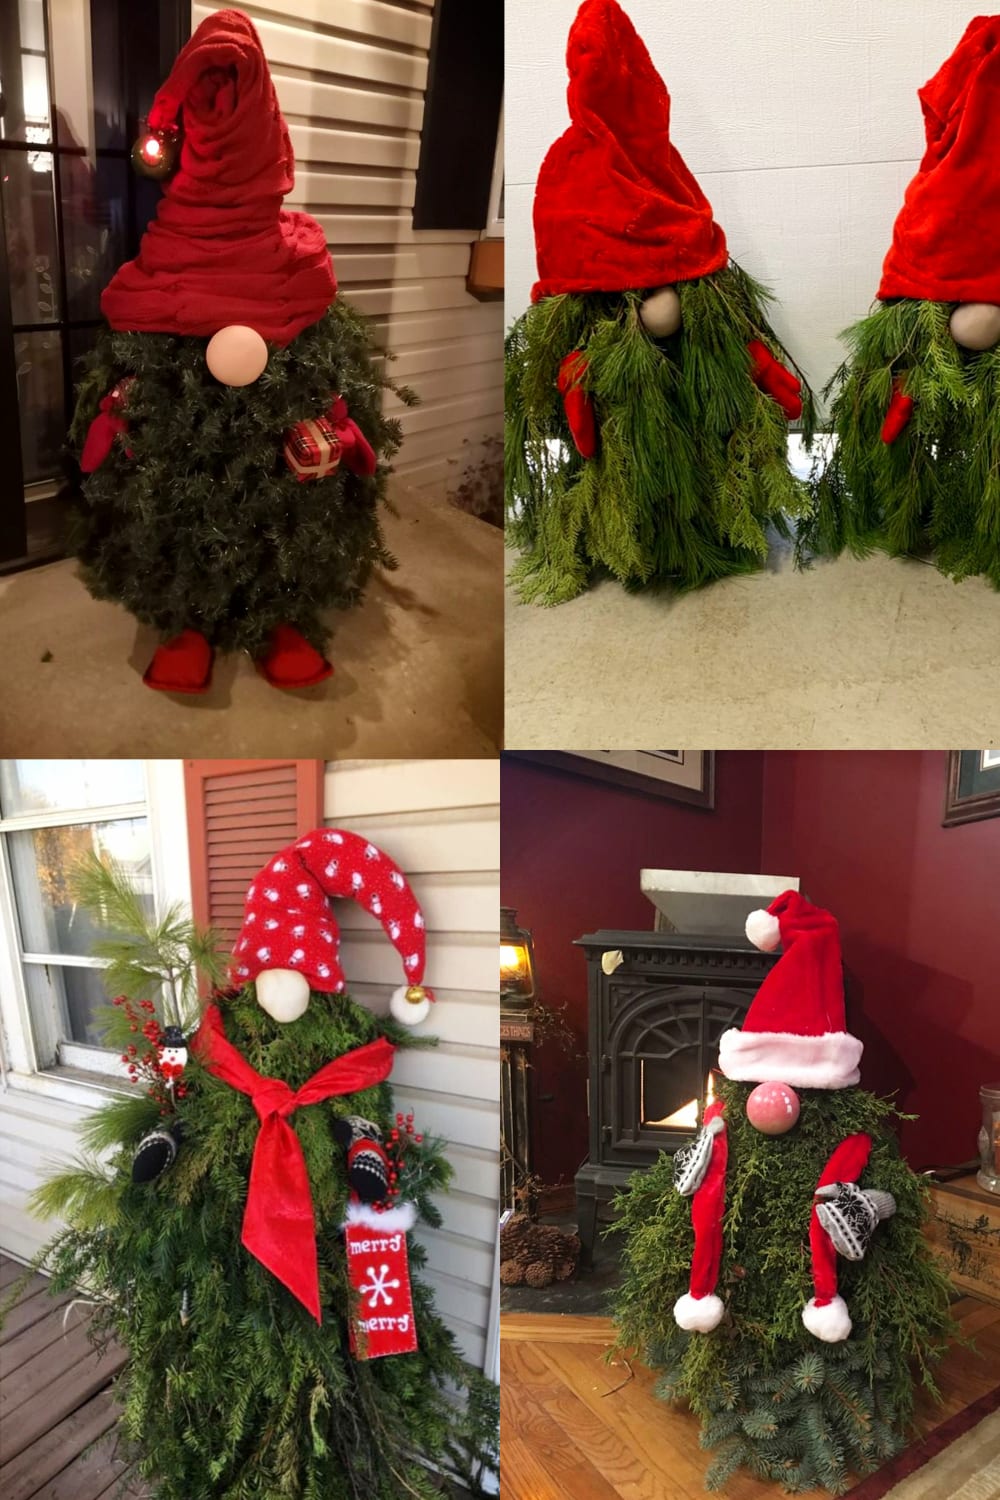 Christmas crafts for adults-simple Christmas craft ideas for adults to make - like these gnome trees! These DIY gnomes look like Christmas trees made with evergreen branches, a tomato cage and a potato nose